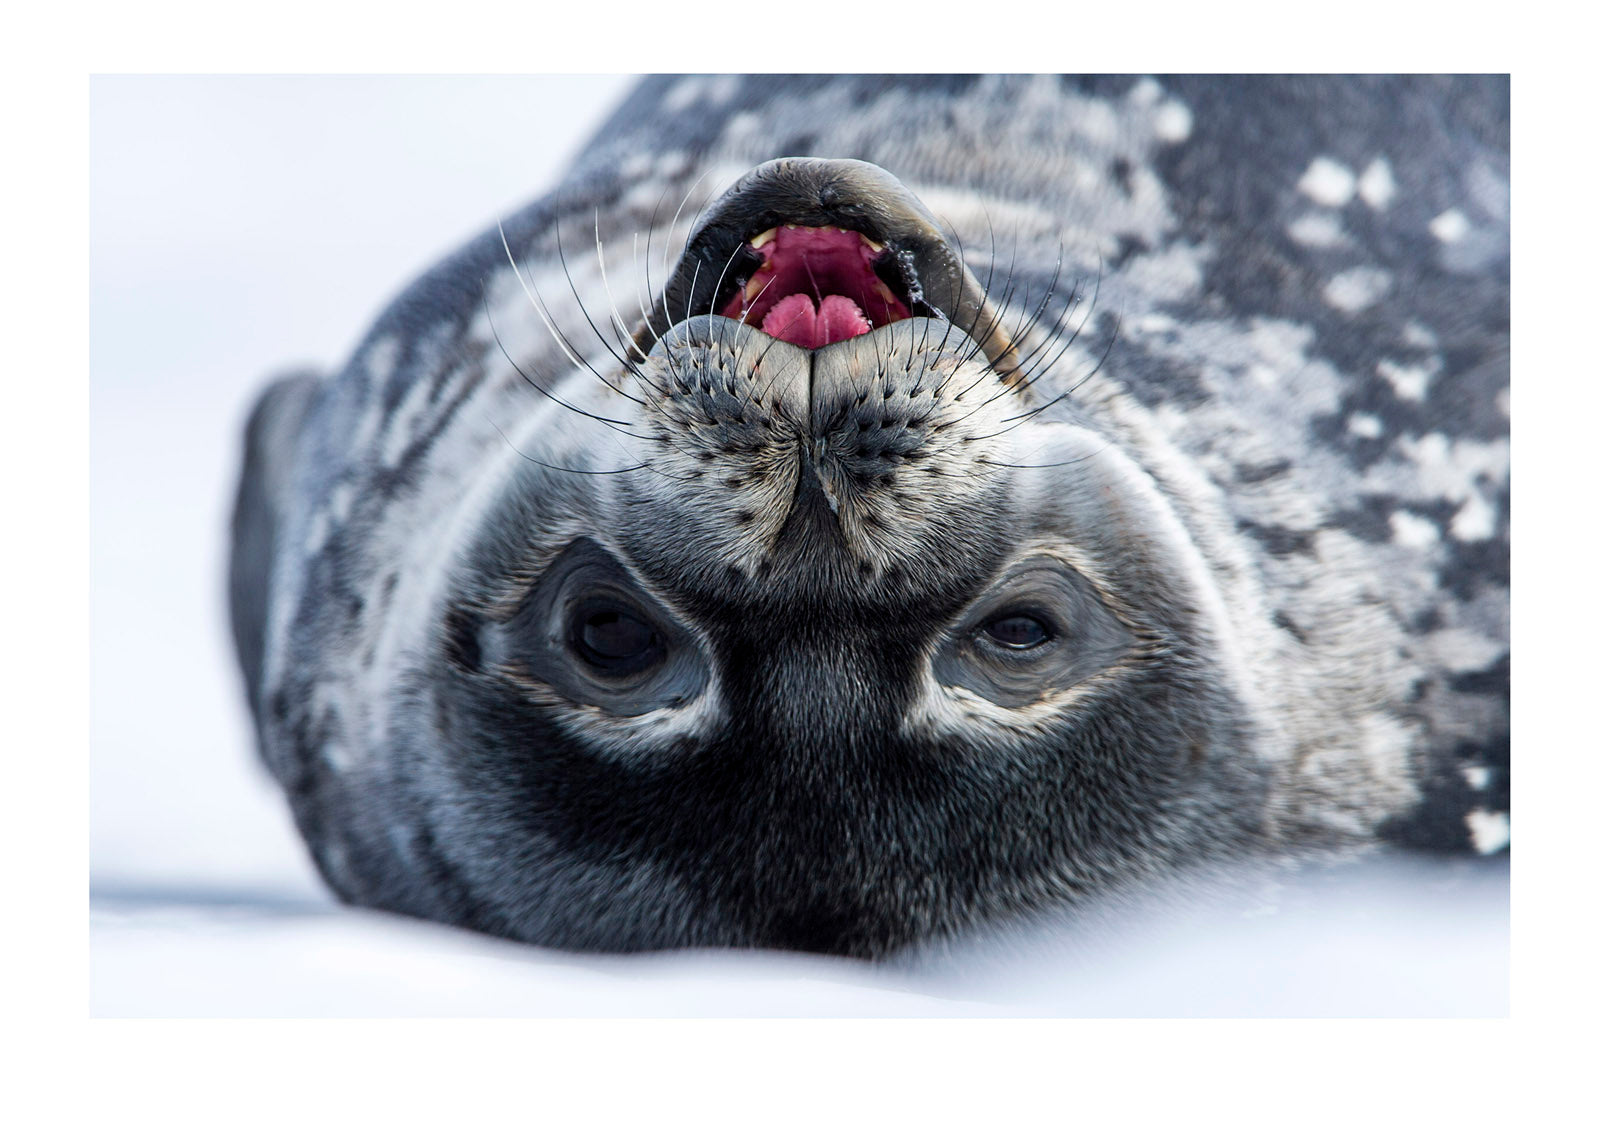 The smiling face of a cute Weddell Seal pup resting on the sea ice. Turtle Rock, Erebus Bay, McMurdo Sound, Ross Island, Antarctica.